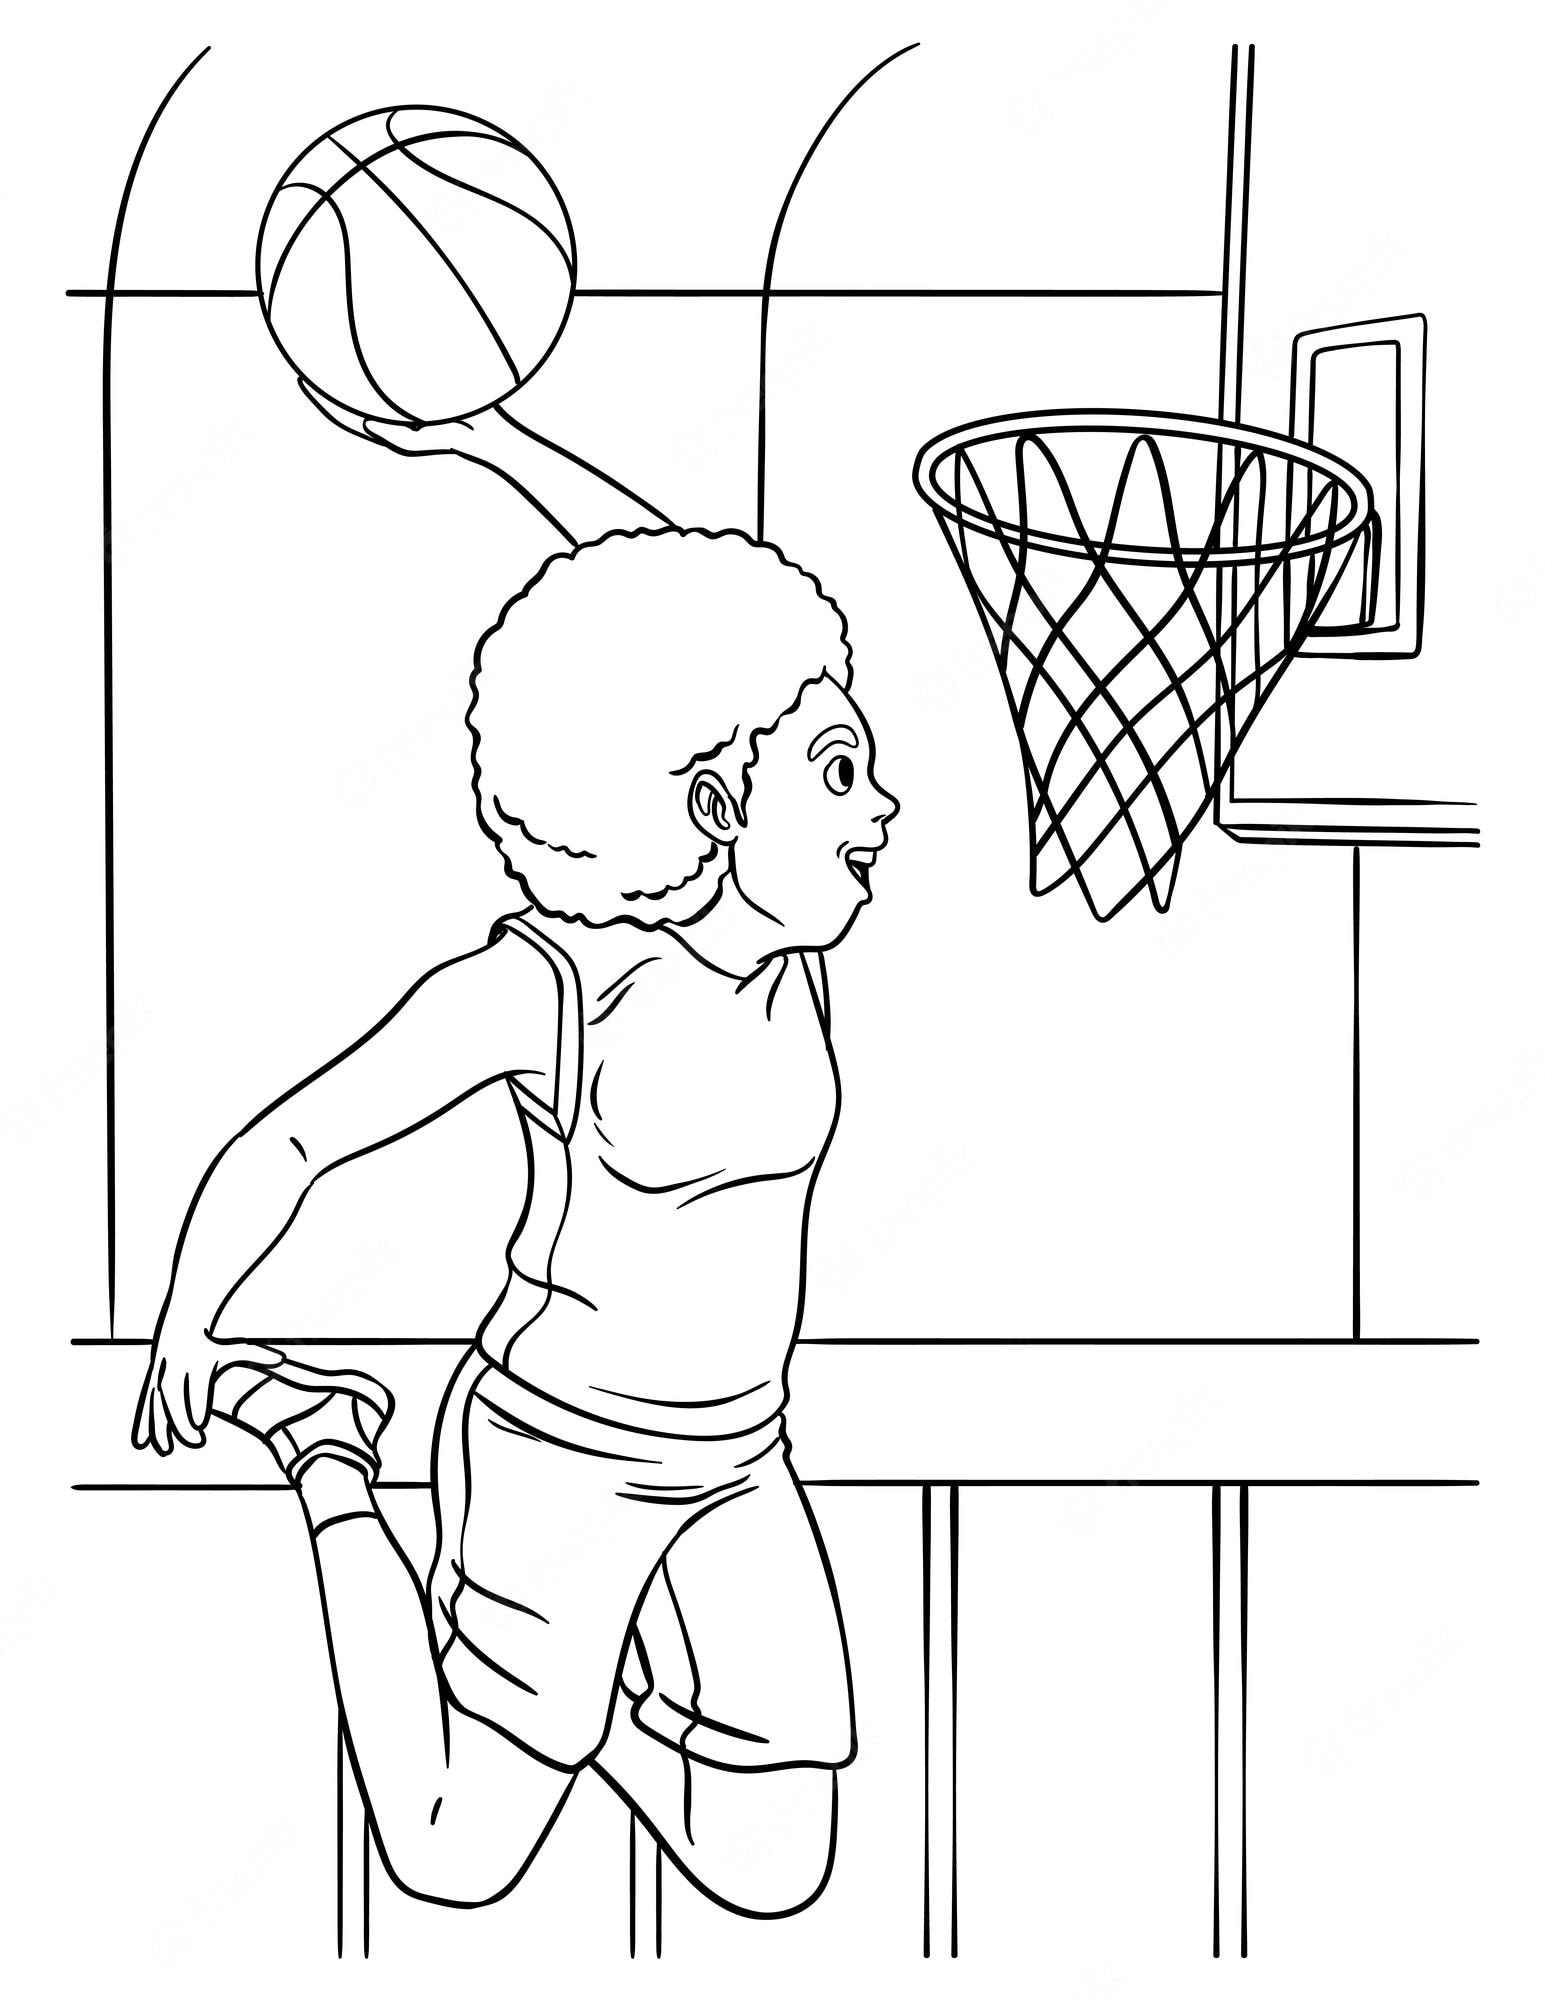 Premium Vector | Basketball girl slam dunk coloring page for kids